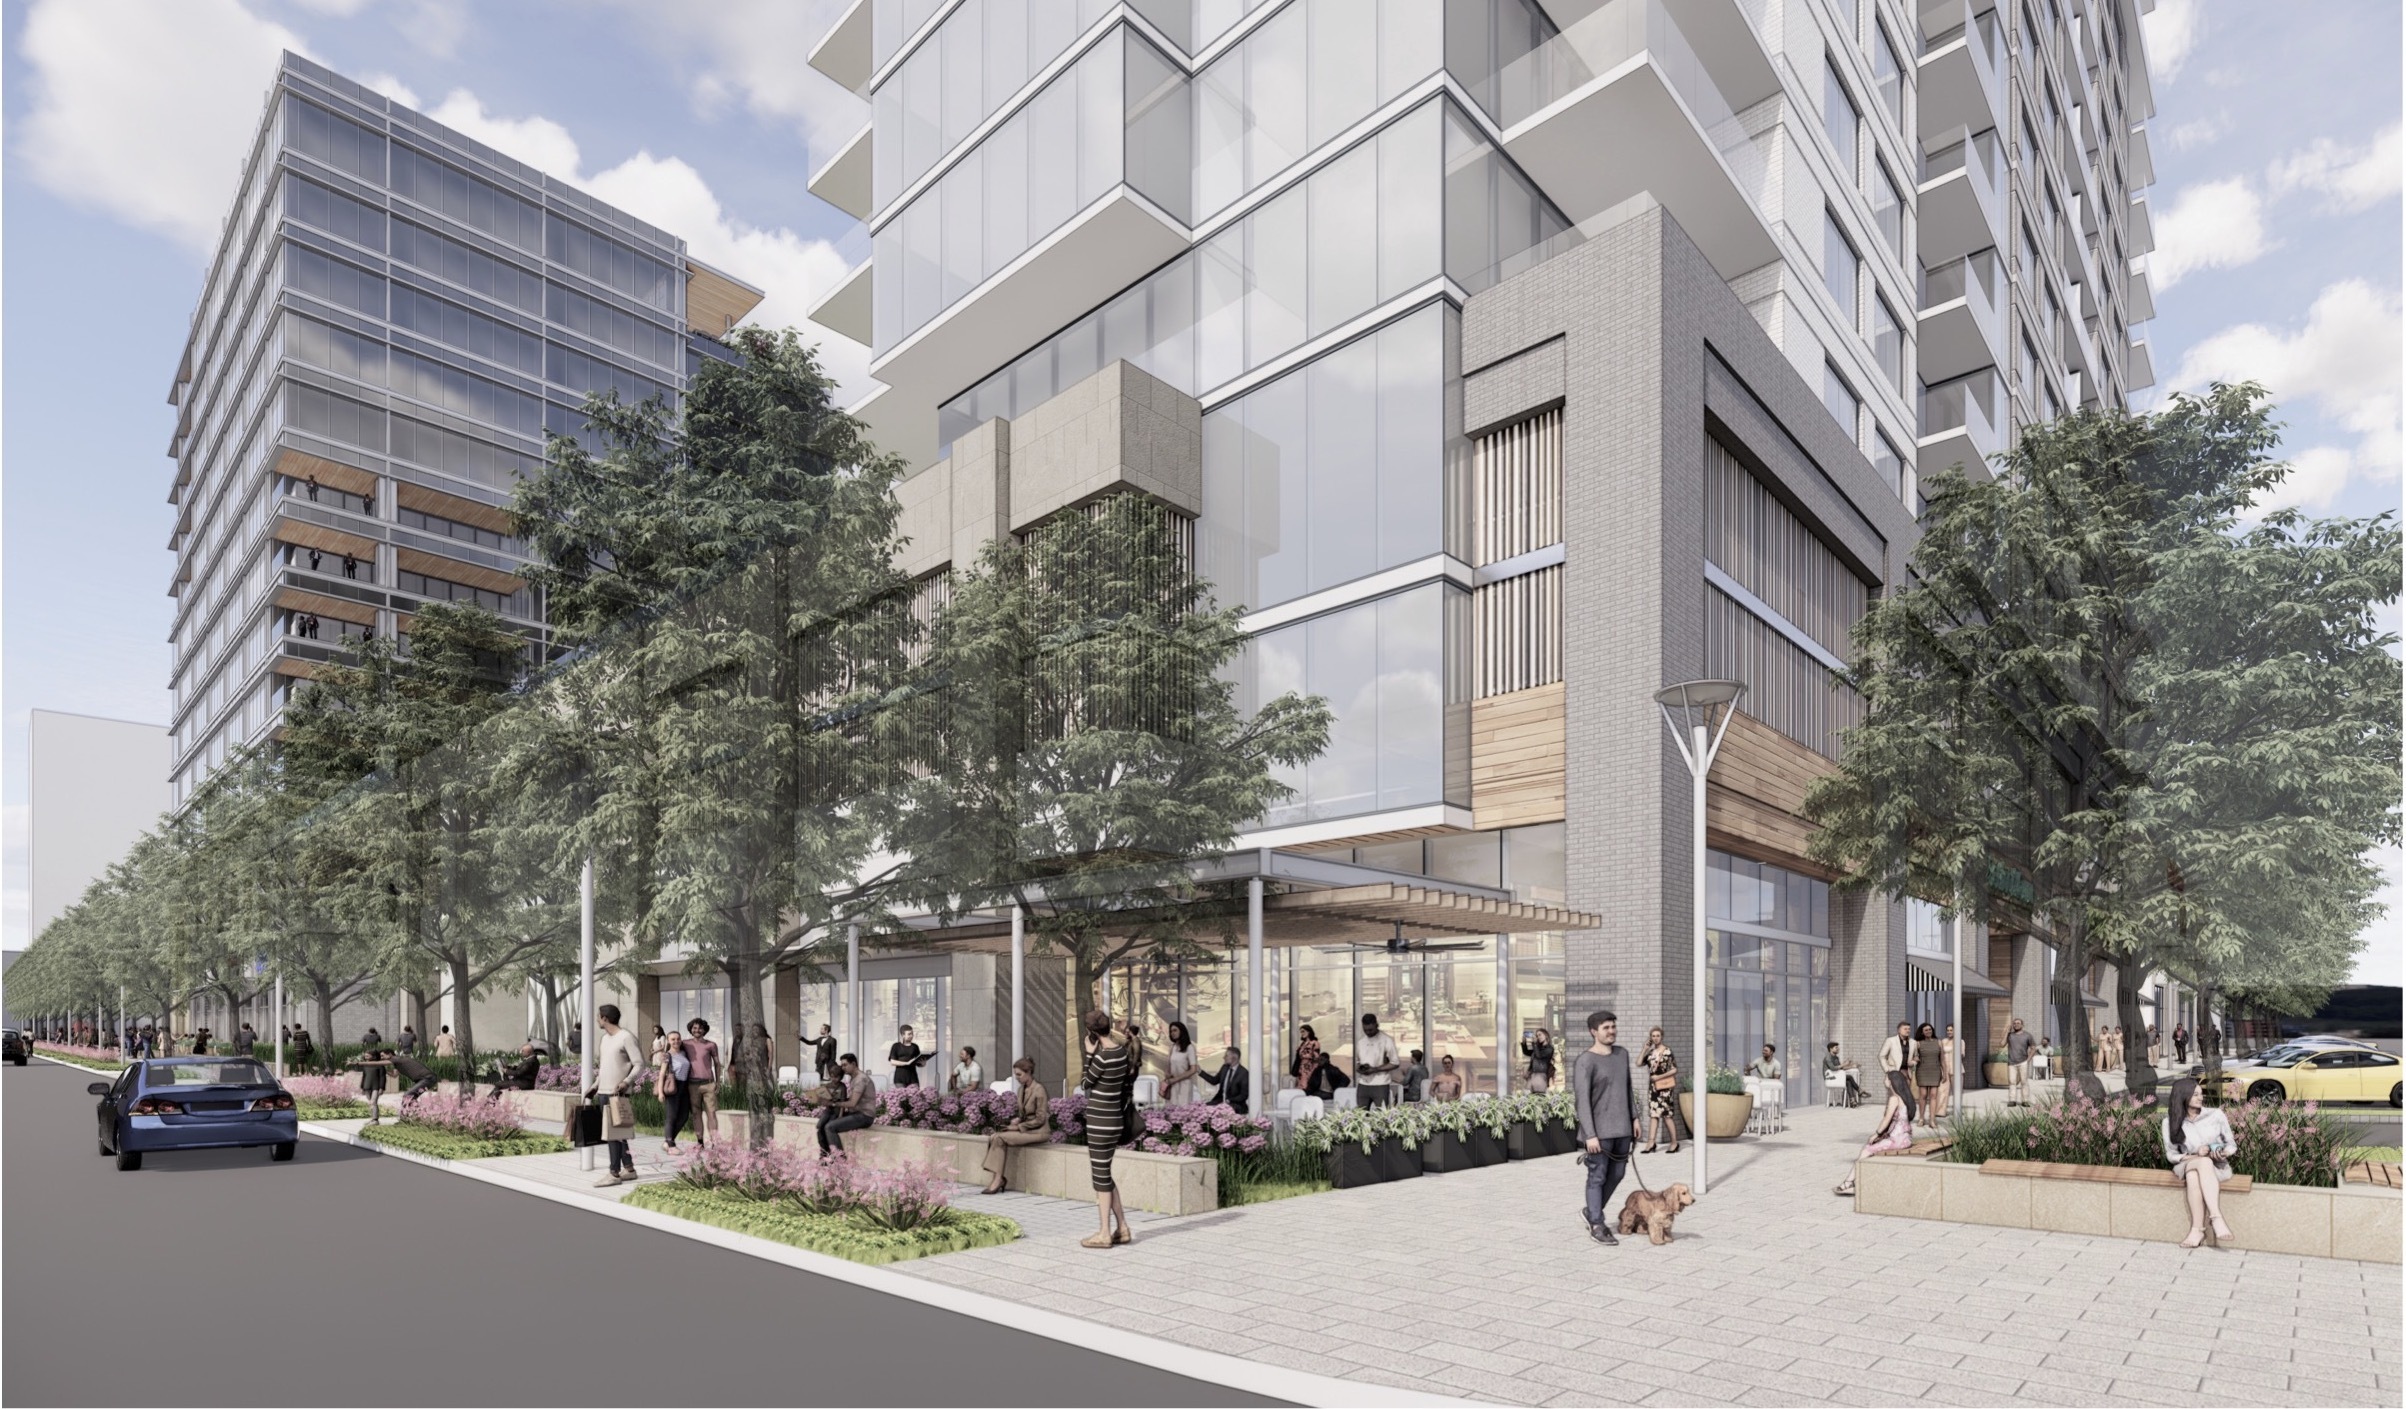 The redevelopment plan for North Dallas' Preston Center would add high-rise apartments and...